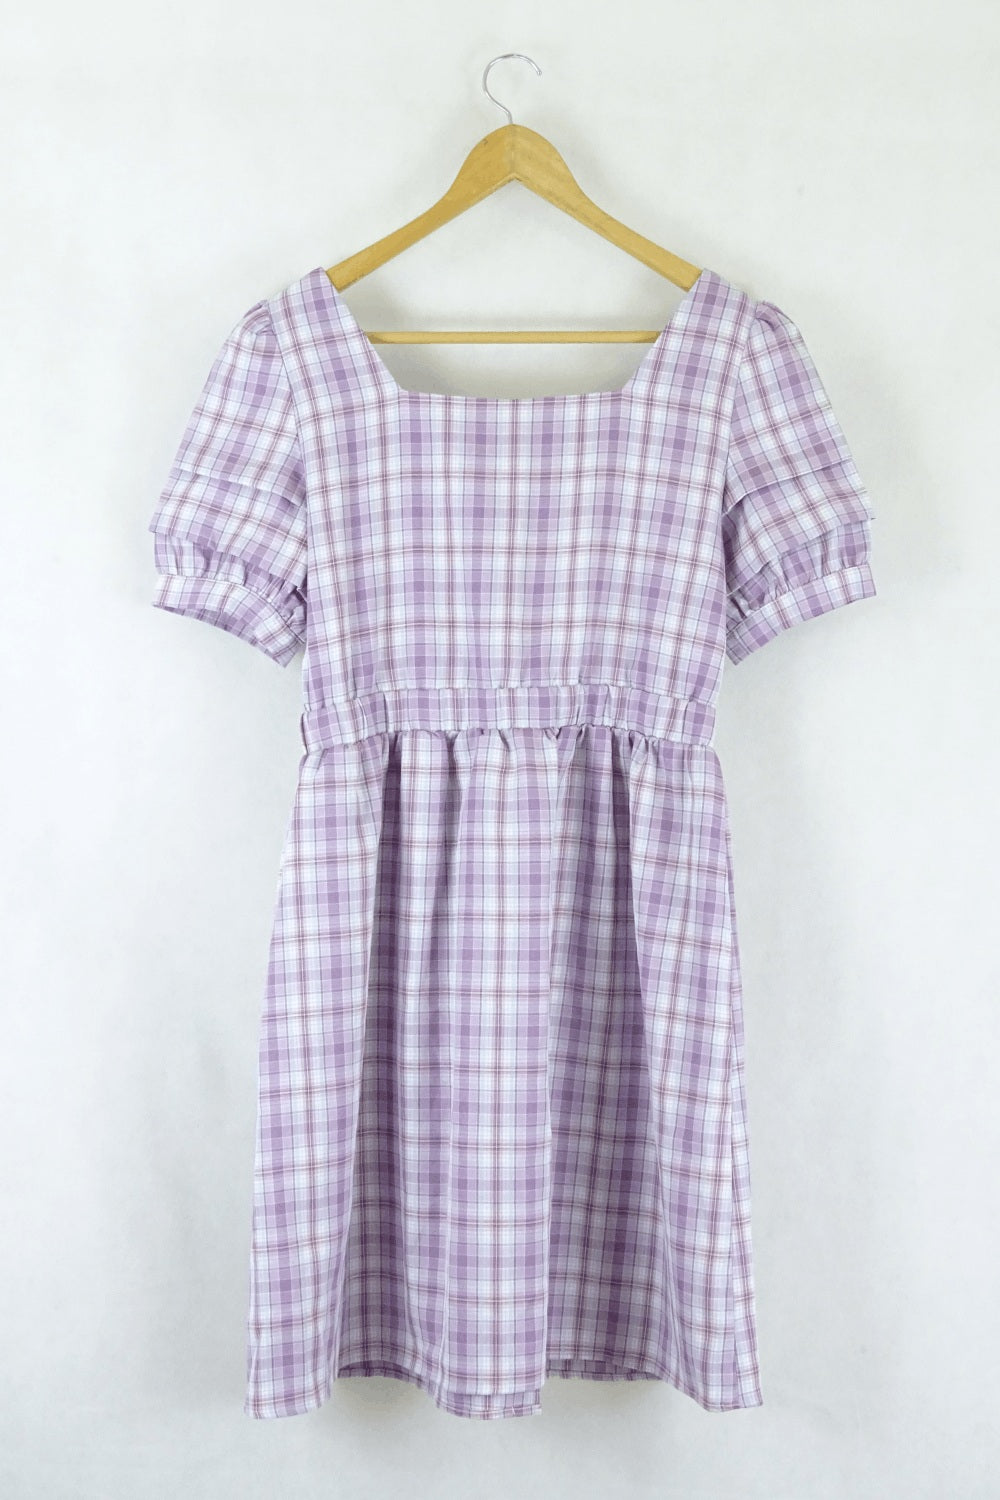 One More - Vintage Style Buttoned Down Checked Dress M